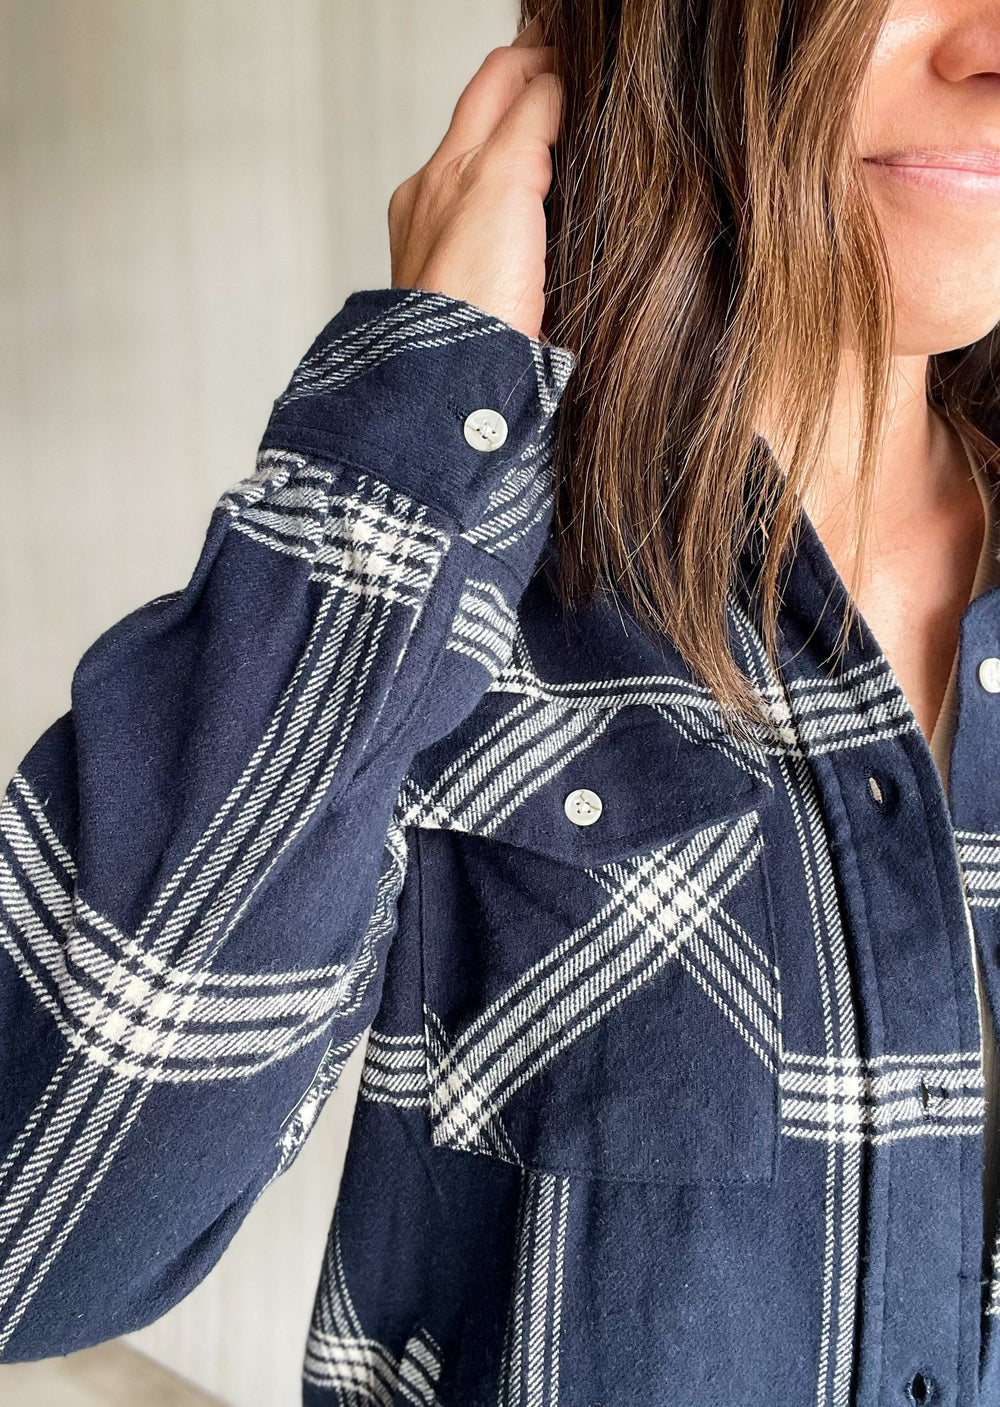 Navy and Ivory Button Up plaid top | Women's flannel tops 